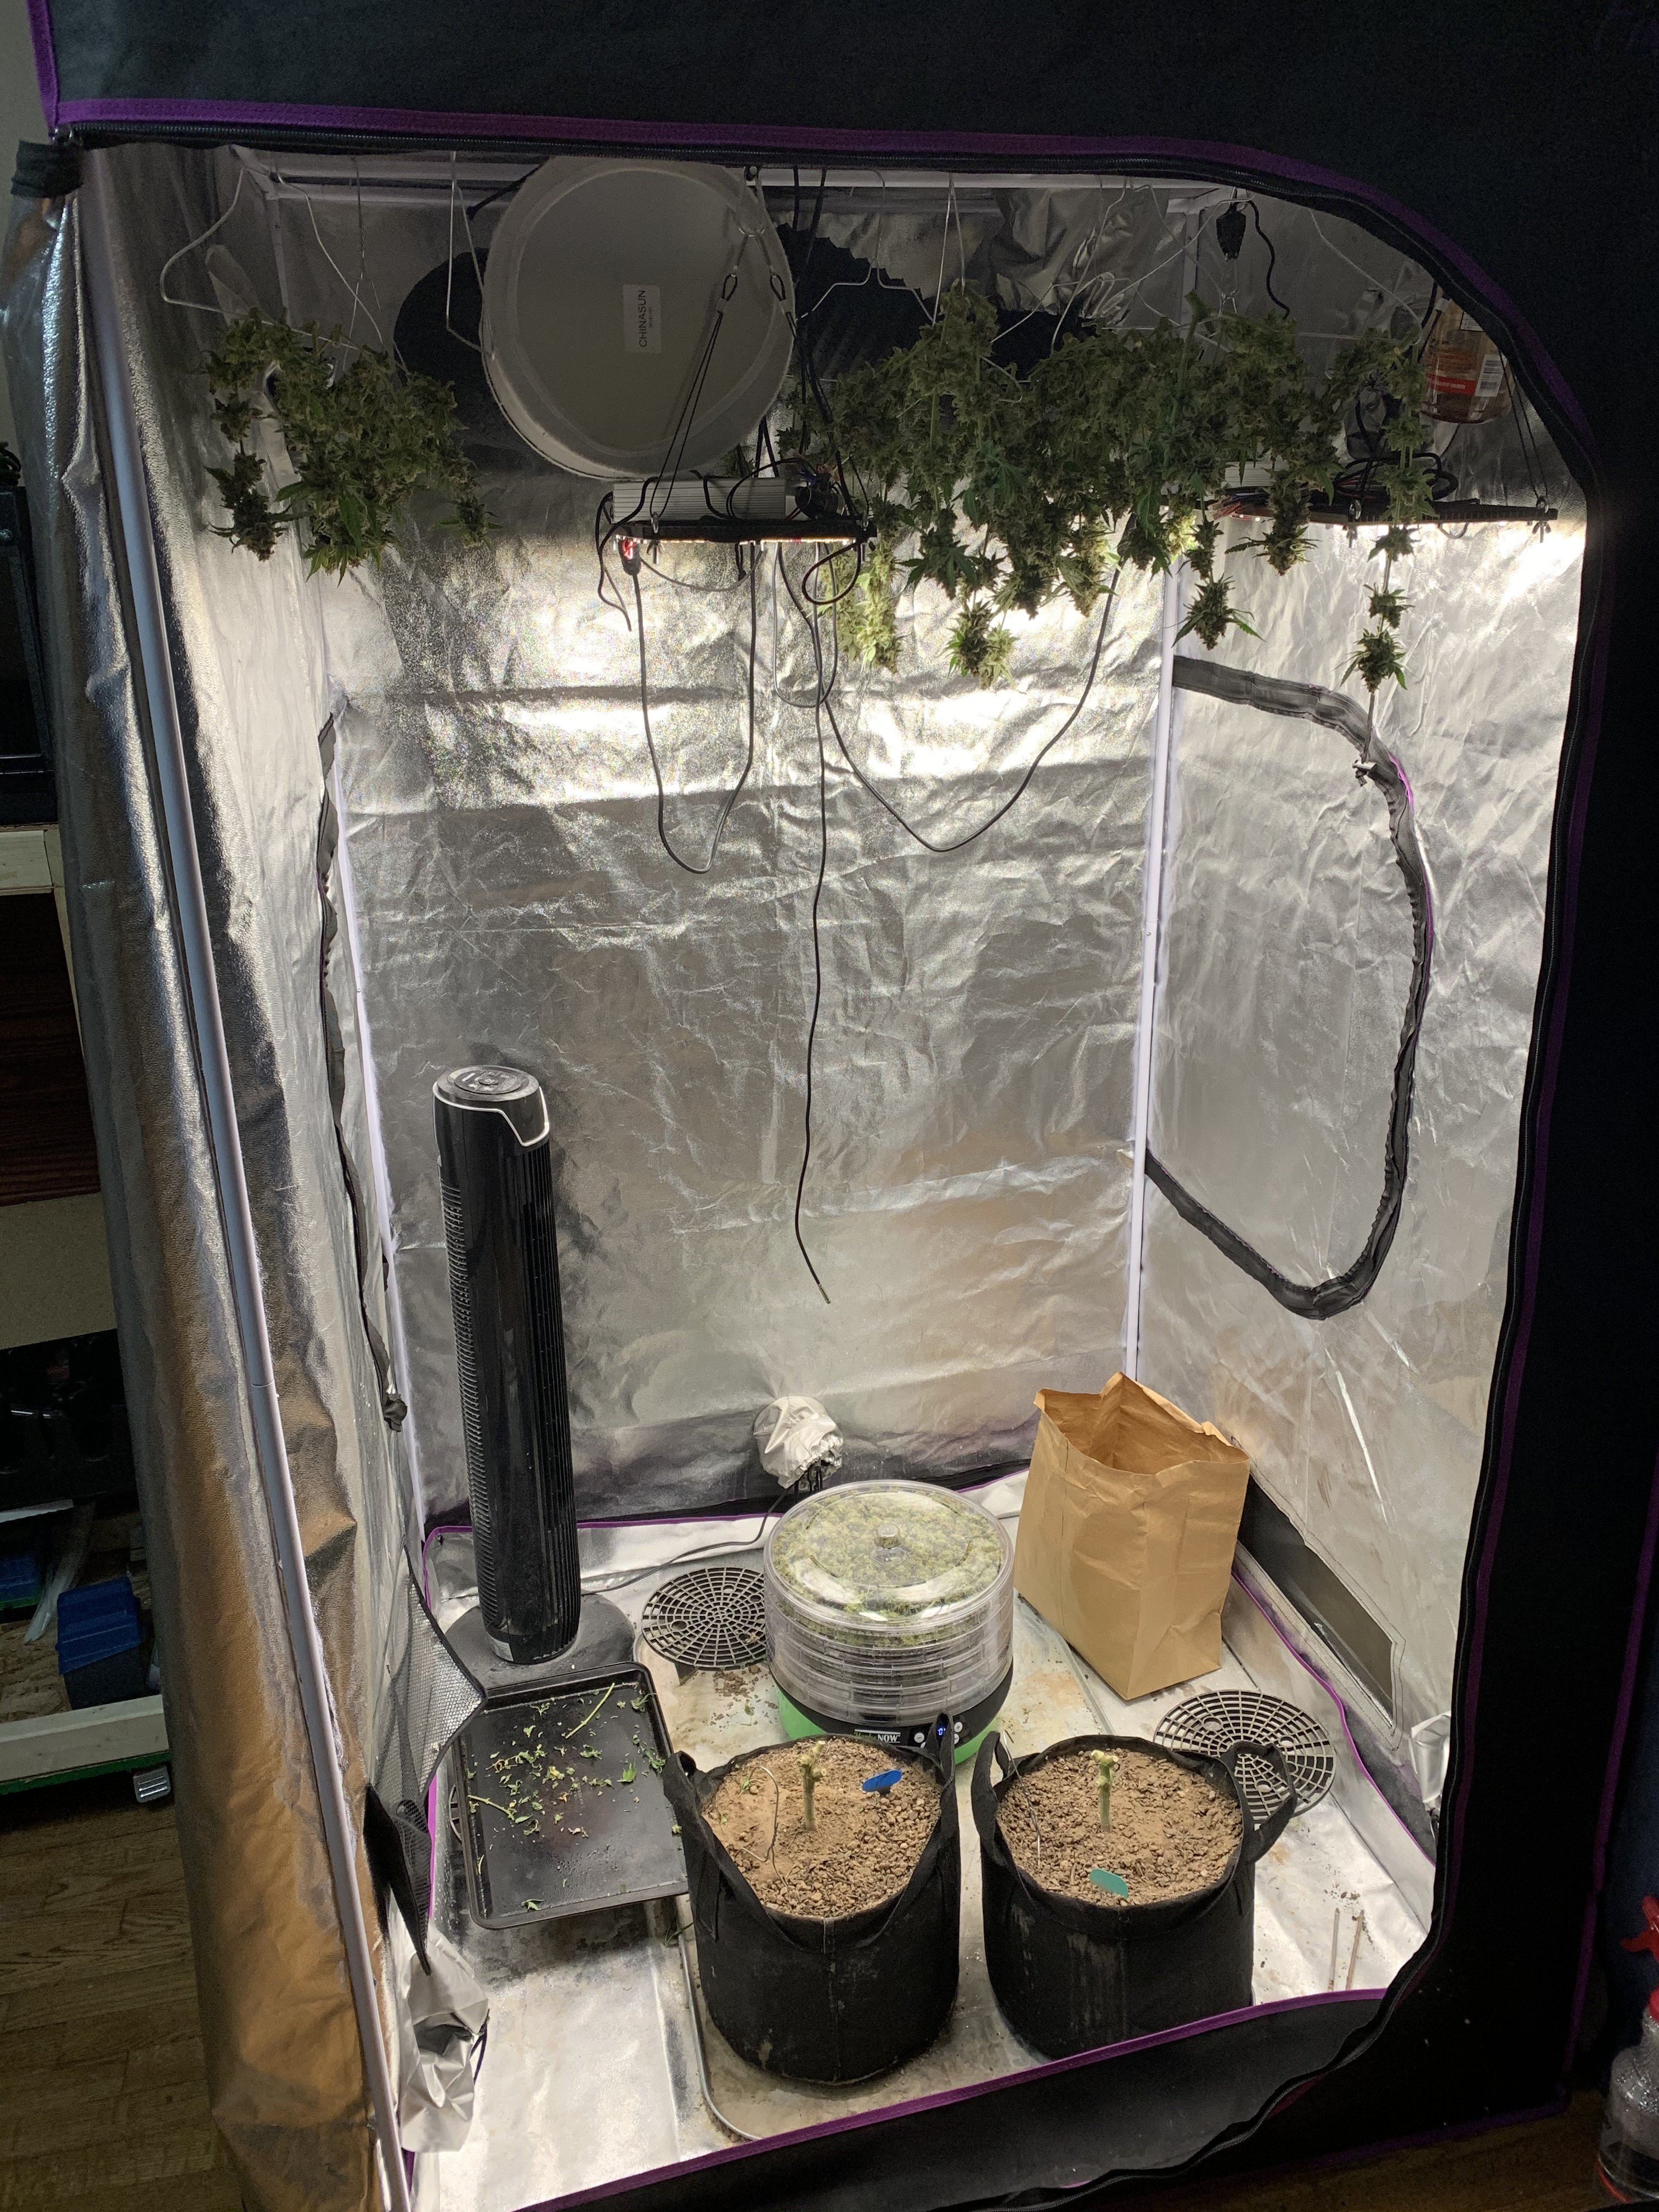 Review of the HerbsNow Dryer for Drying Cannabis